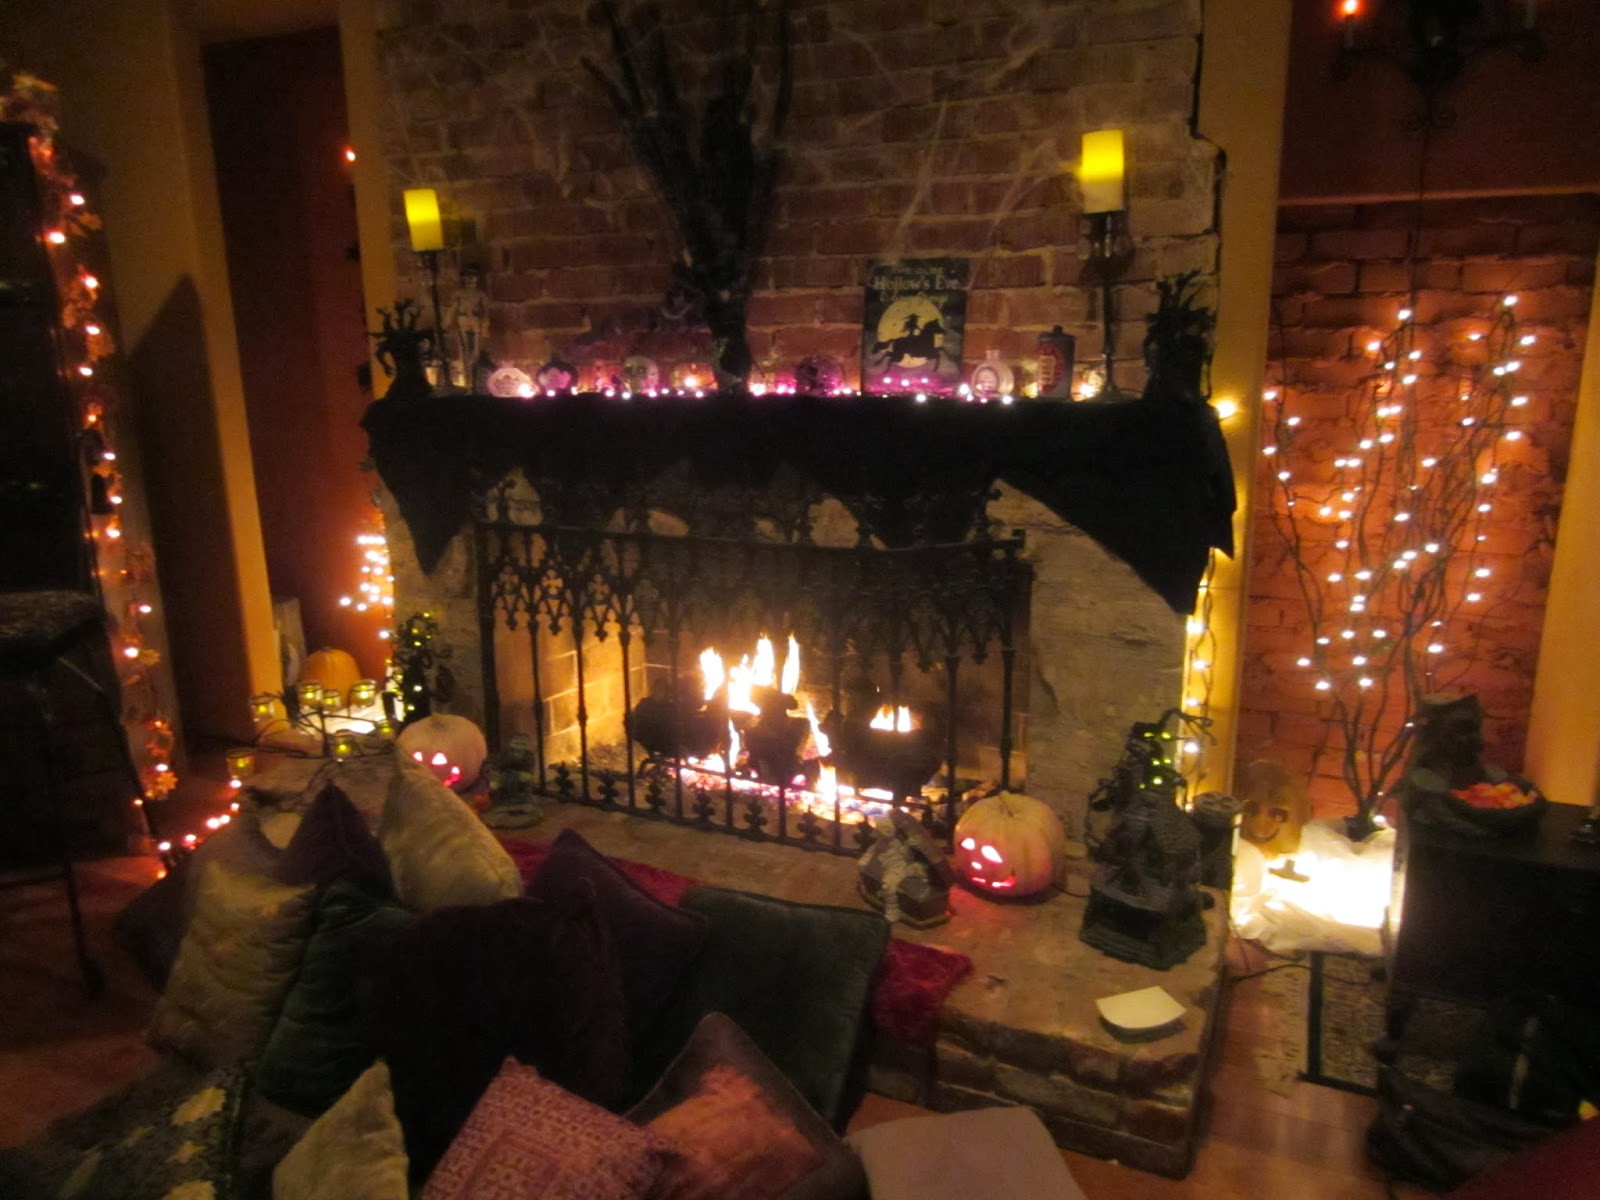 Halloween Party House Decorating Ideas
 How To Decorate Your Room For Halloween